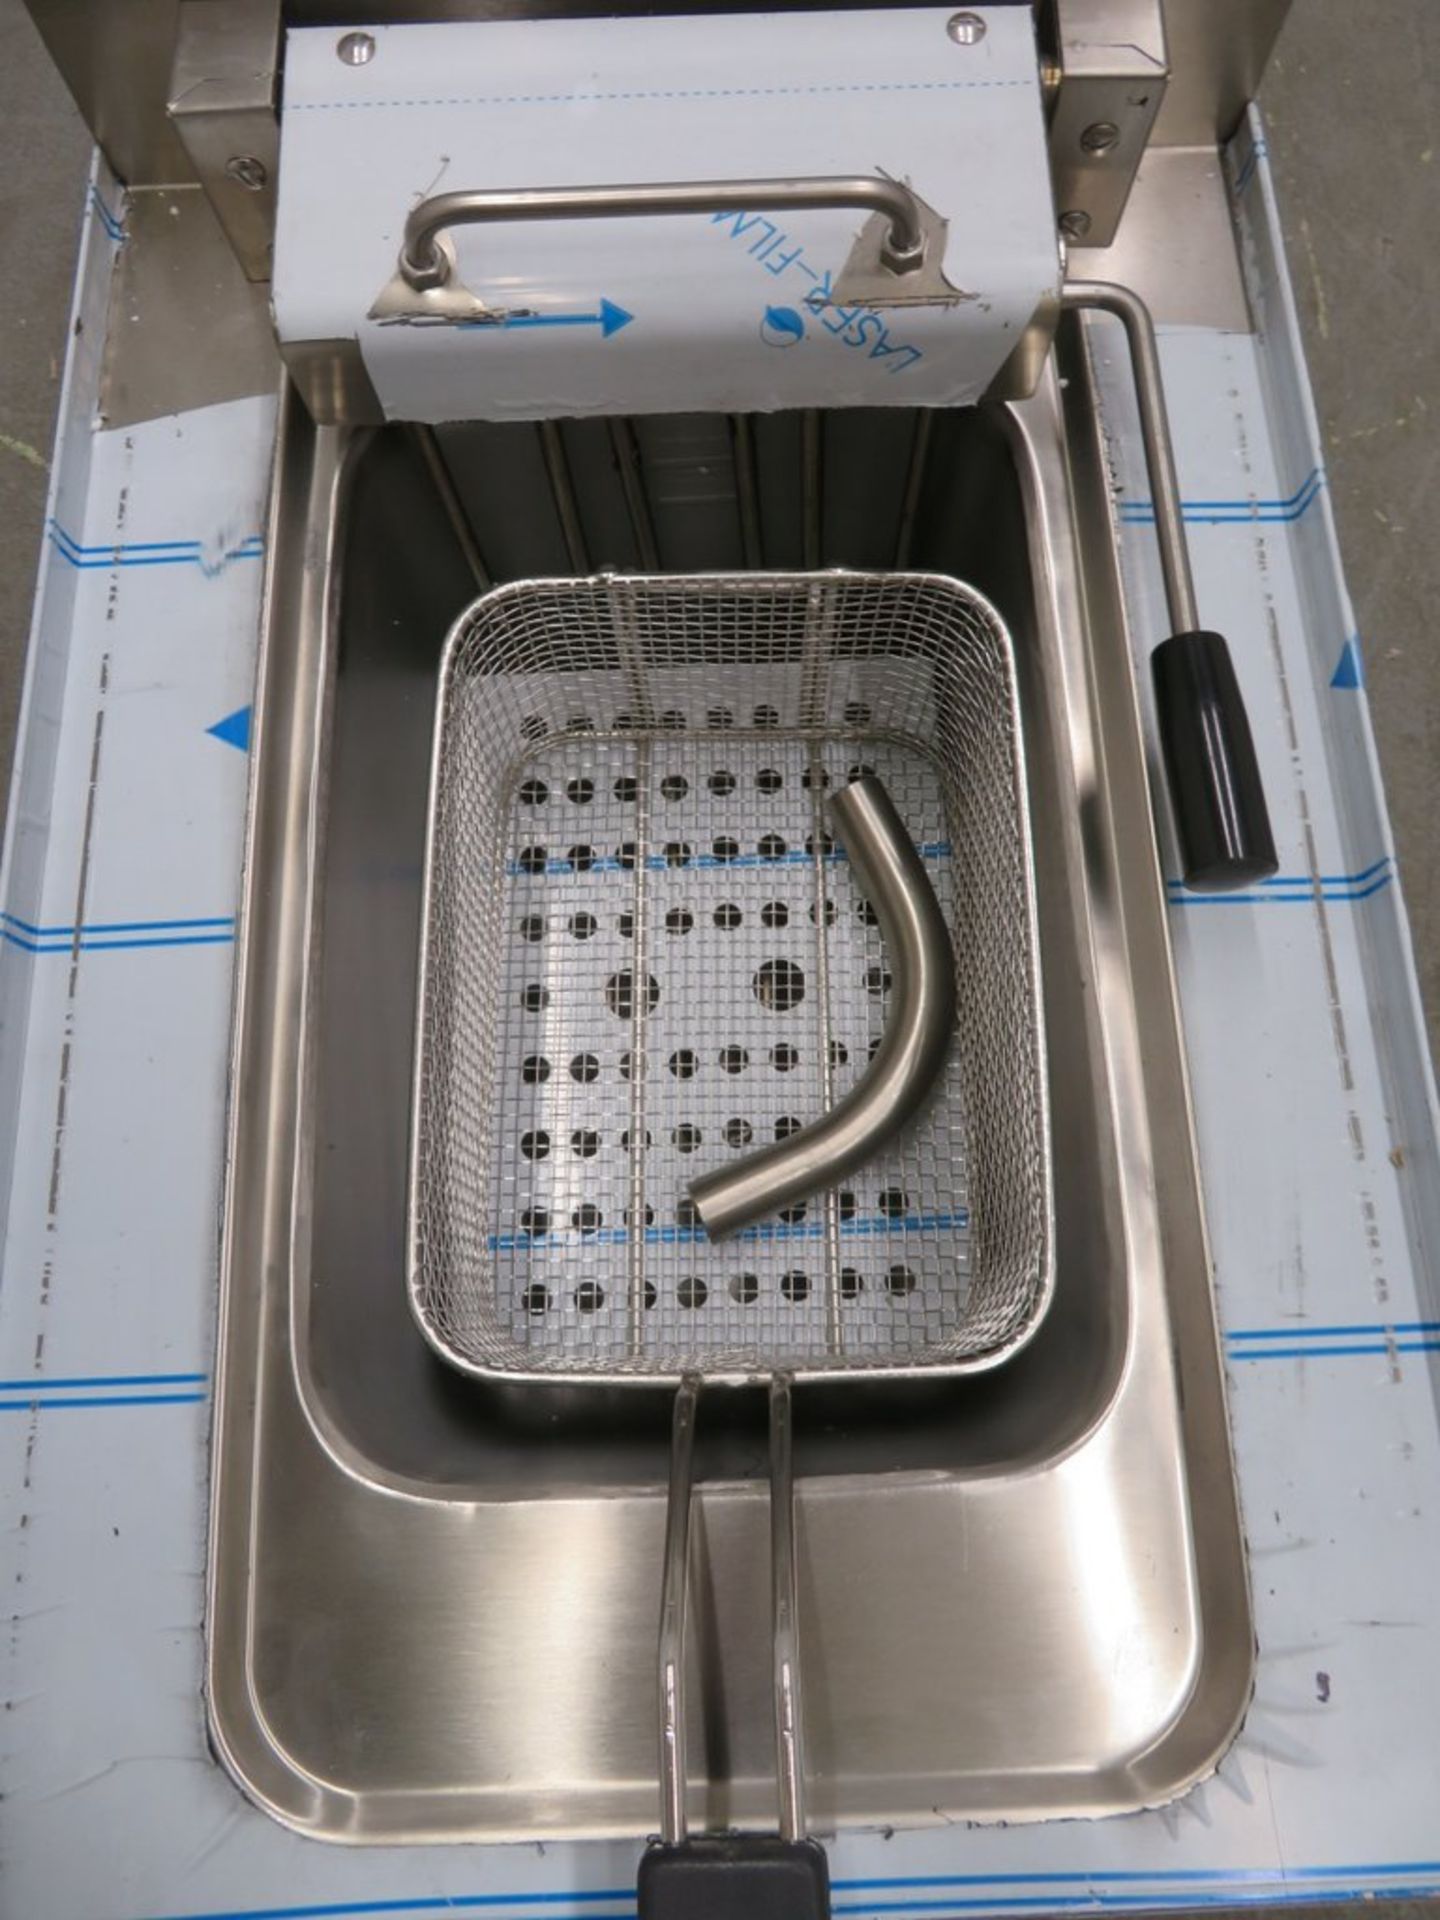 Countertop single tank fryer, 3 phase electric, new - Image 5 of 8